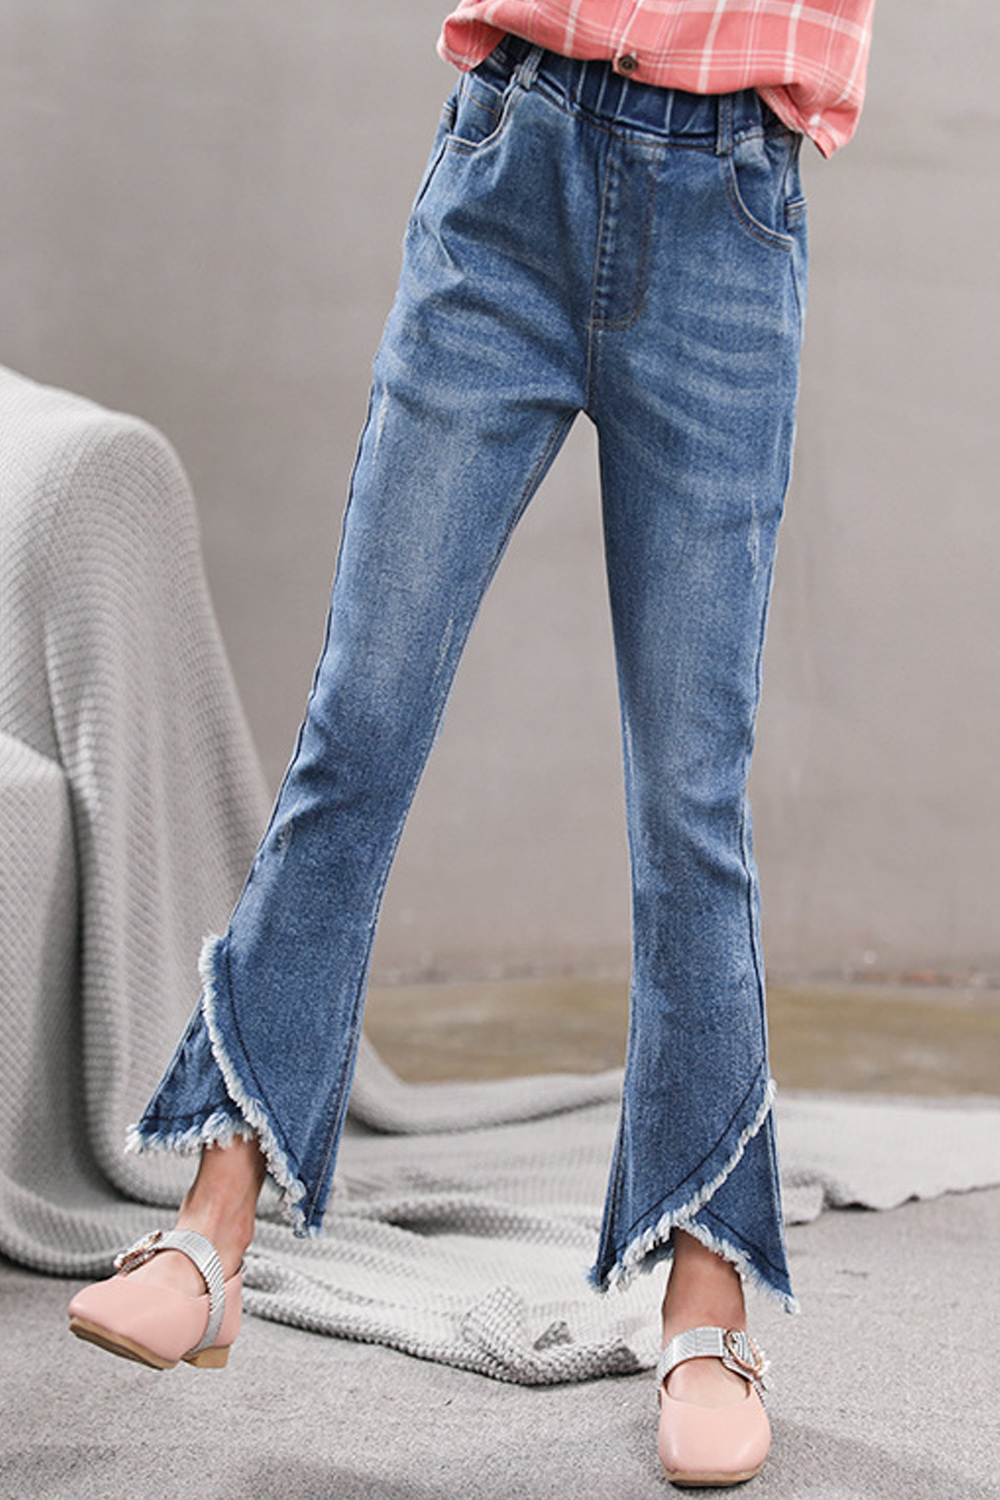 bell bottom style jeans